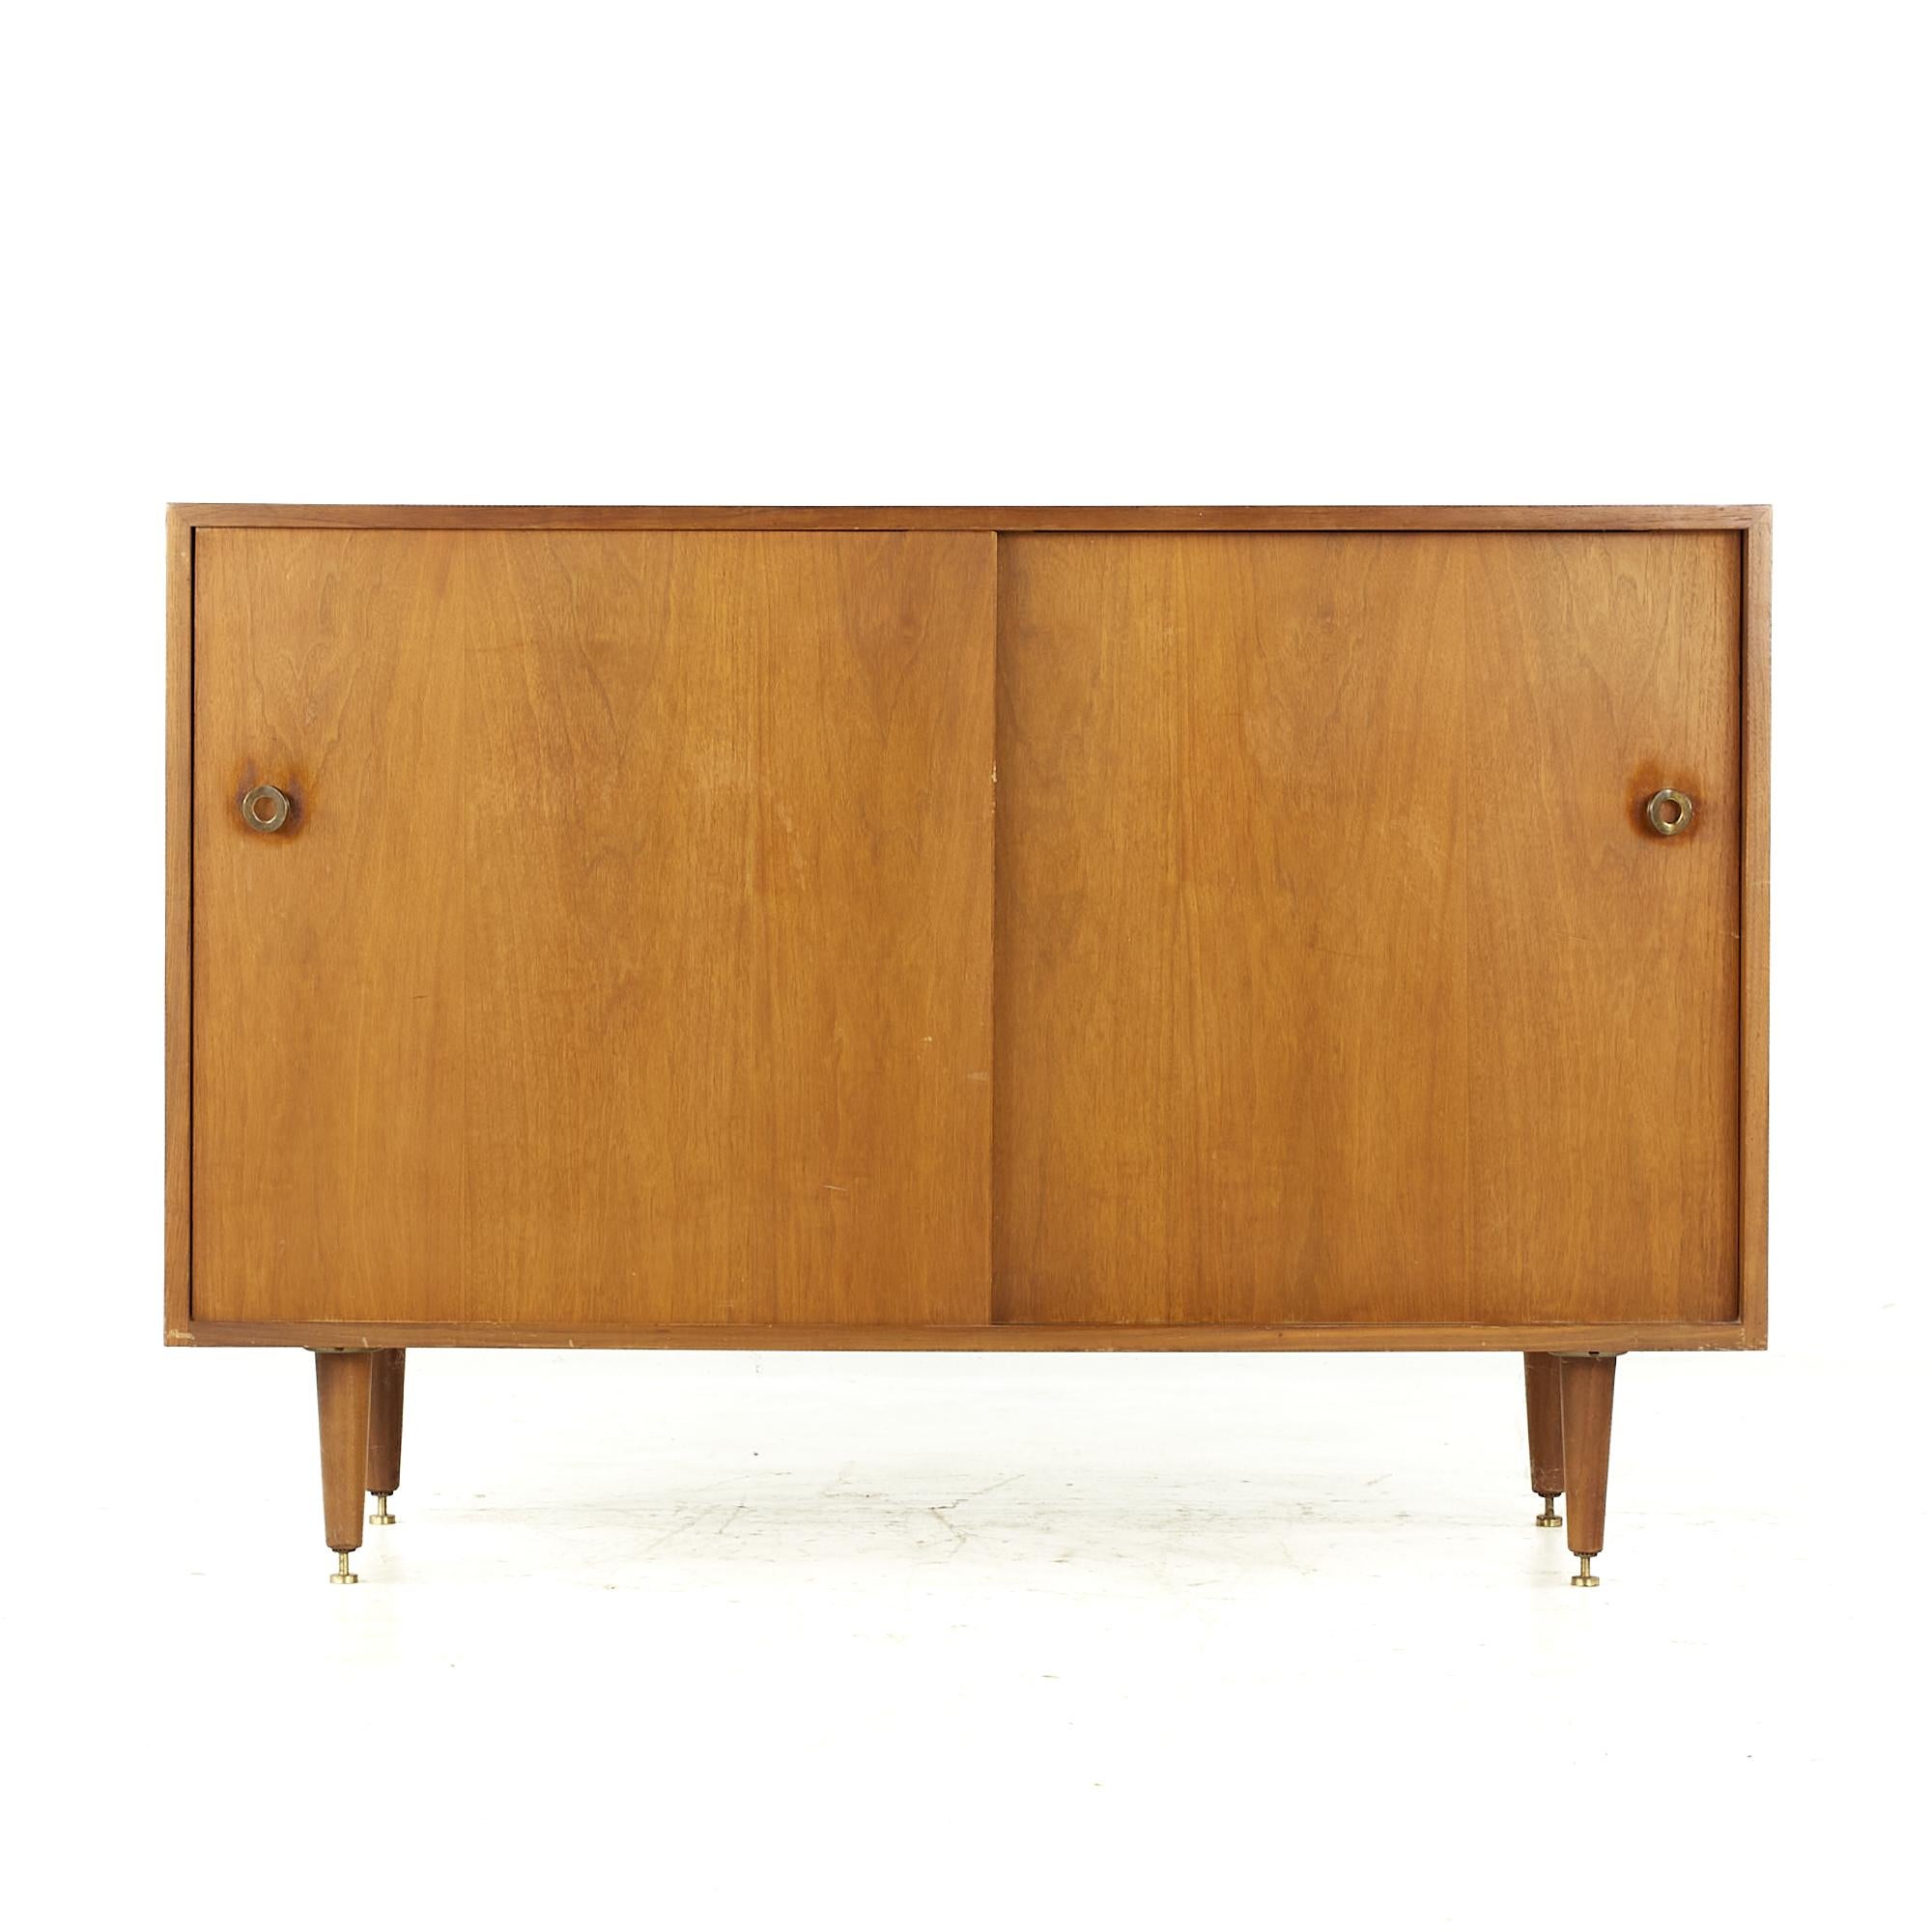 Milo Baughman for Glenn of California midcentury Credenza

This credenza measures: 48 wide x 18 deep x 32.75 inches high

All pieces of furniture can be had in what we call restored vintage condition. That means the piece is restored upon